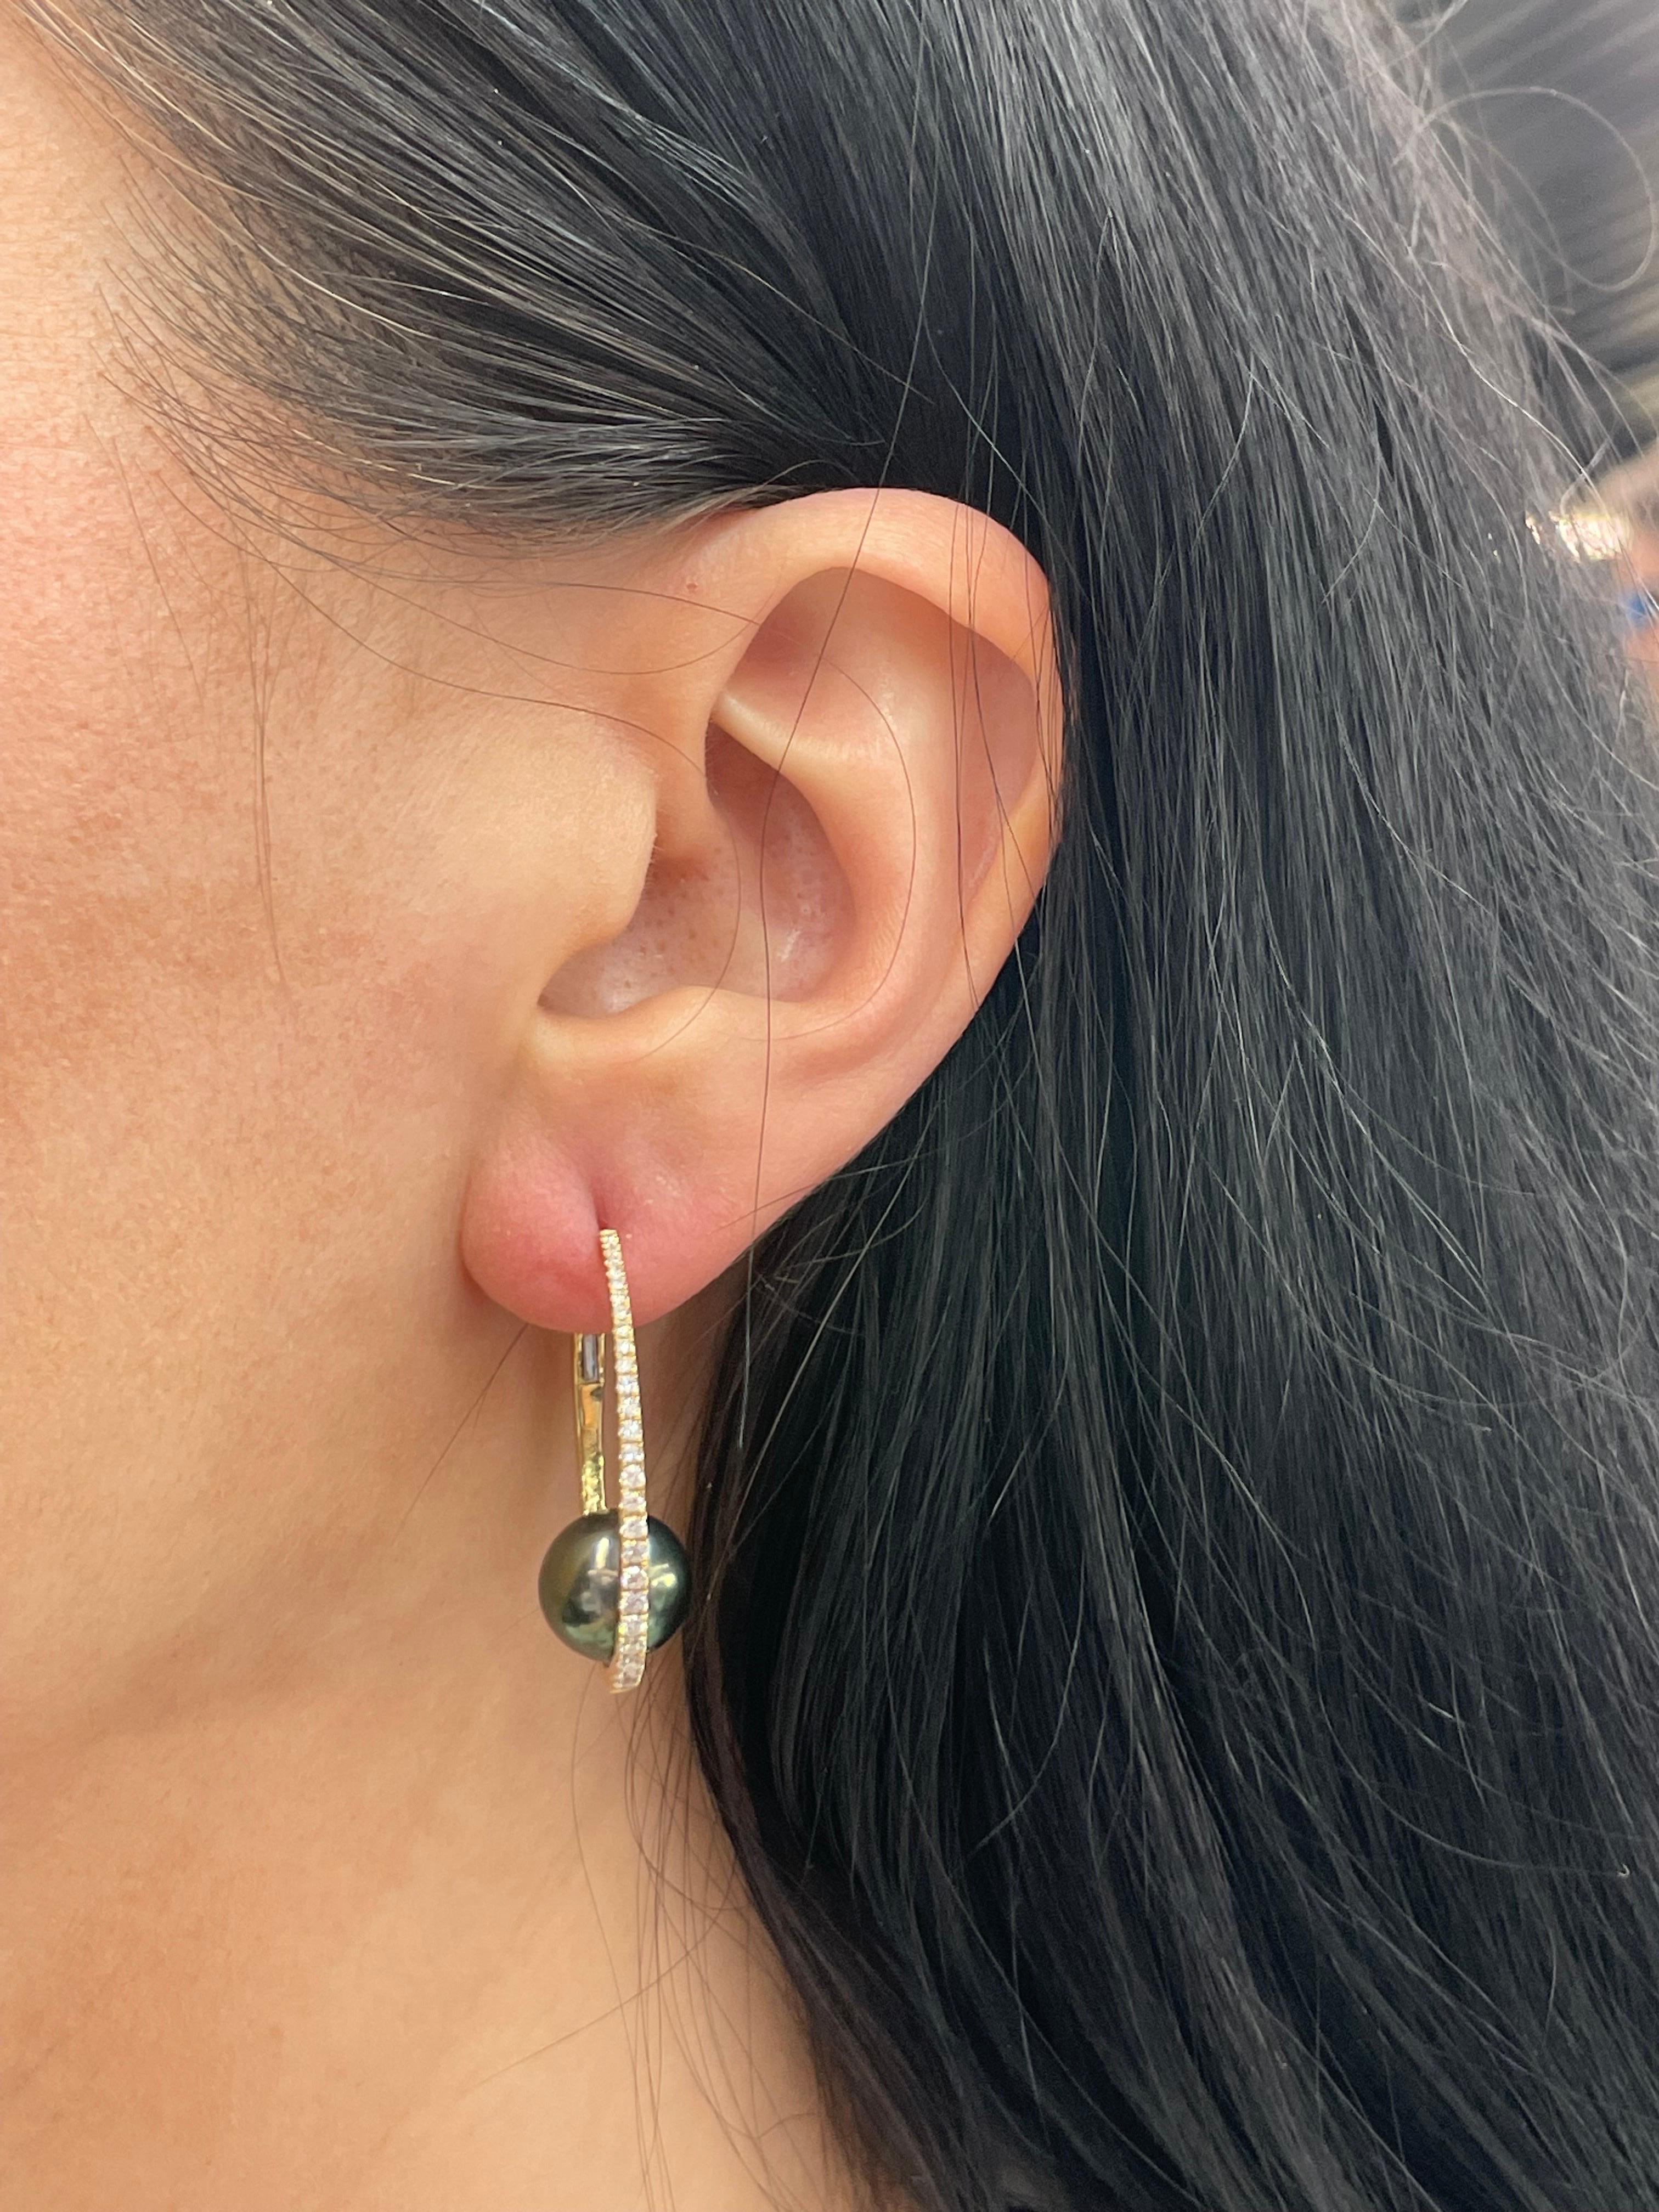 18 Karat Yellow Gold hoop earrings featuring 52 round brilliants weighing 0.52 Carats with two South Sea Pearls measuring 10-11 MM.
Color G-H
Clarity SI

Pearls earrings can be changed to Tahitian, Pink, Gold or South Sea
DM for more videos and